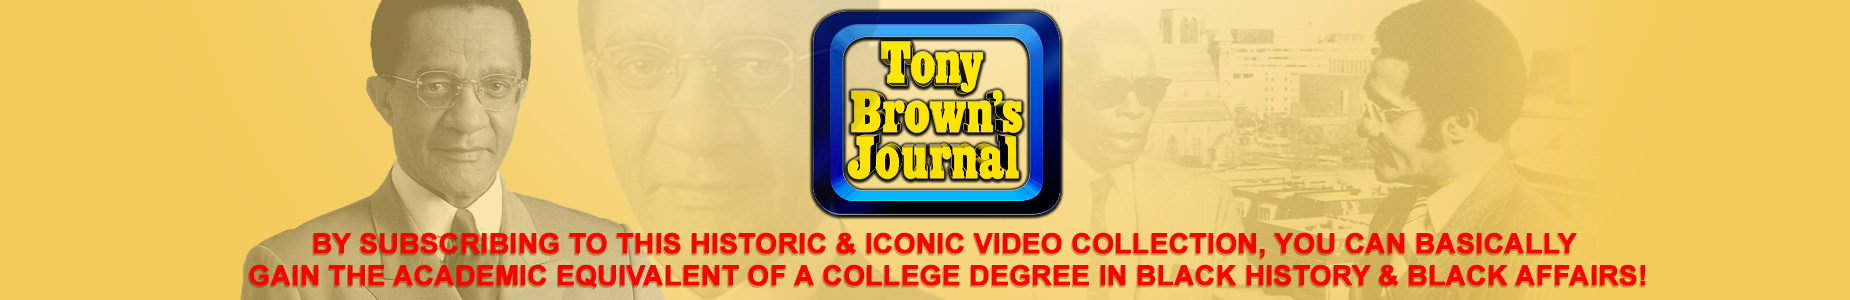 Tony Browns Journal